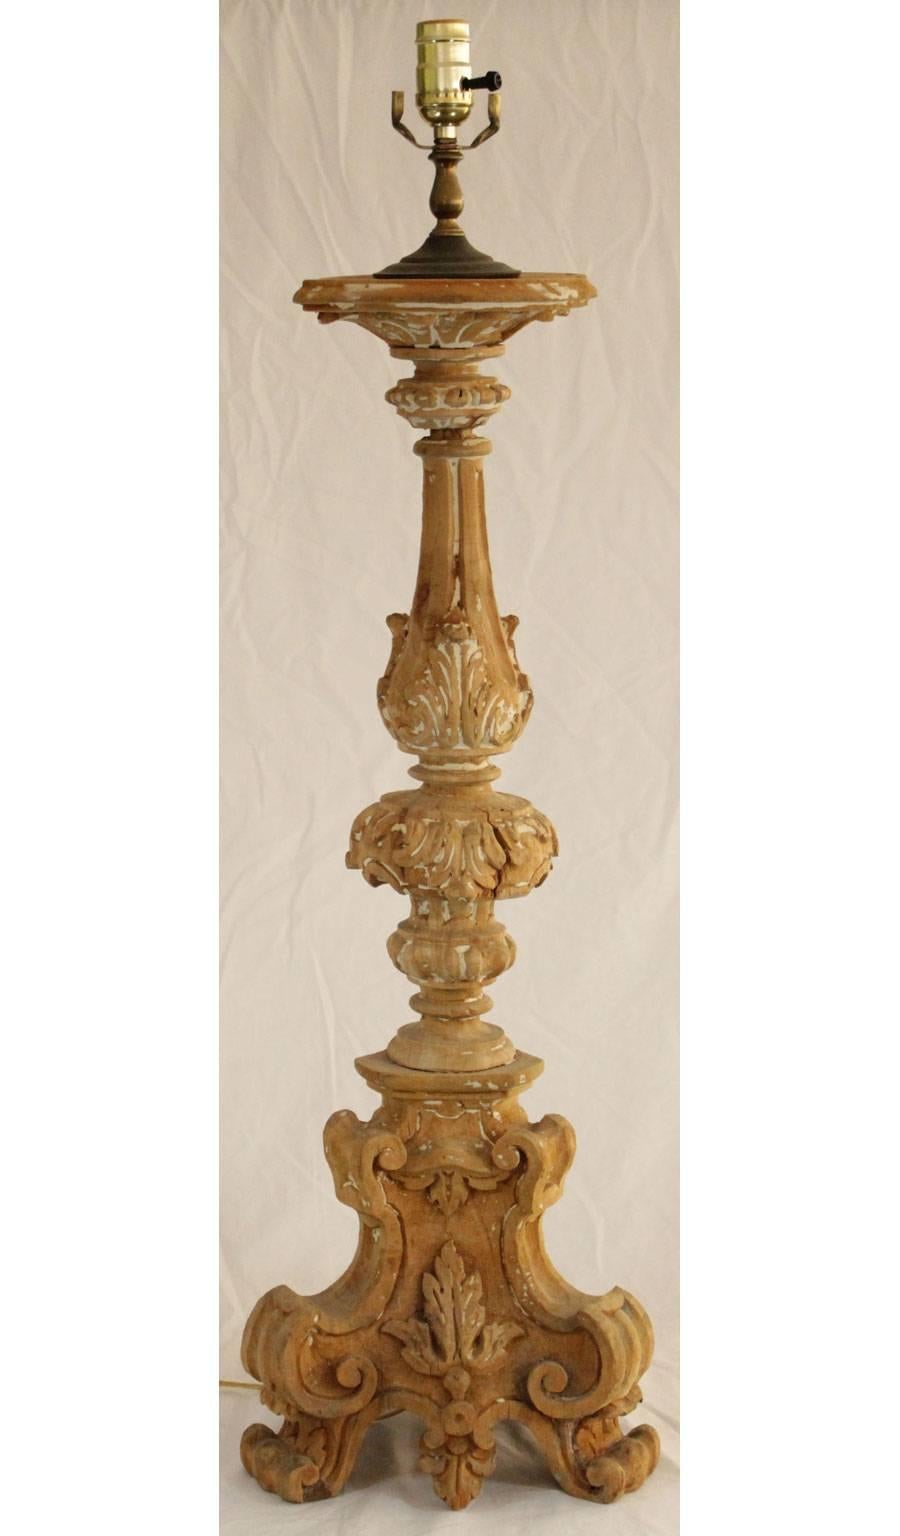 Single pricket stick, of carved wood, having a pickled wood finish, on tripartite base with scroll feet. Electrified.

Stock ID: D6973